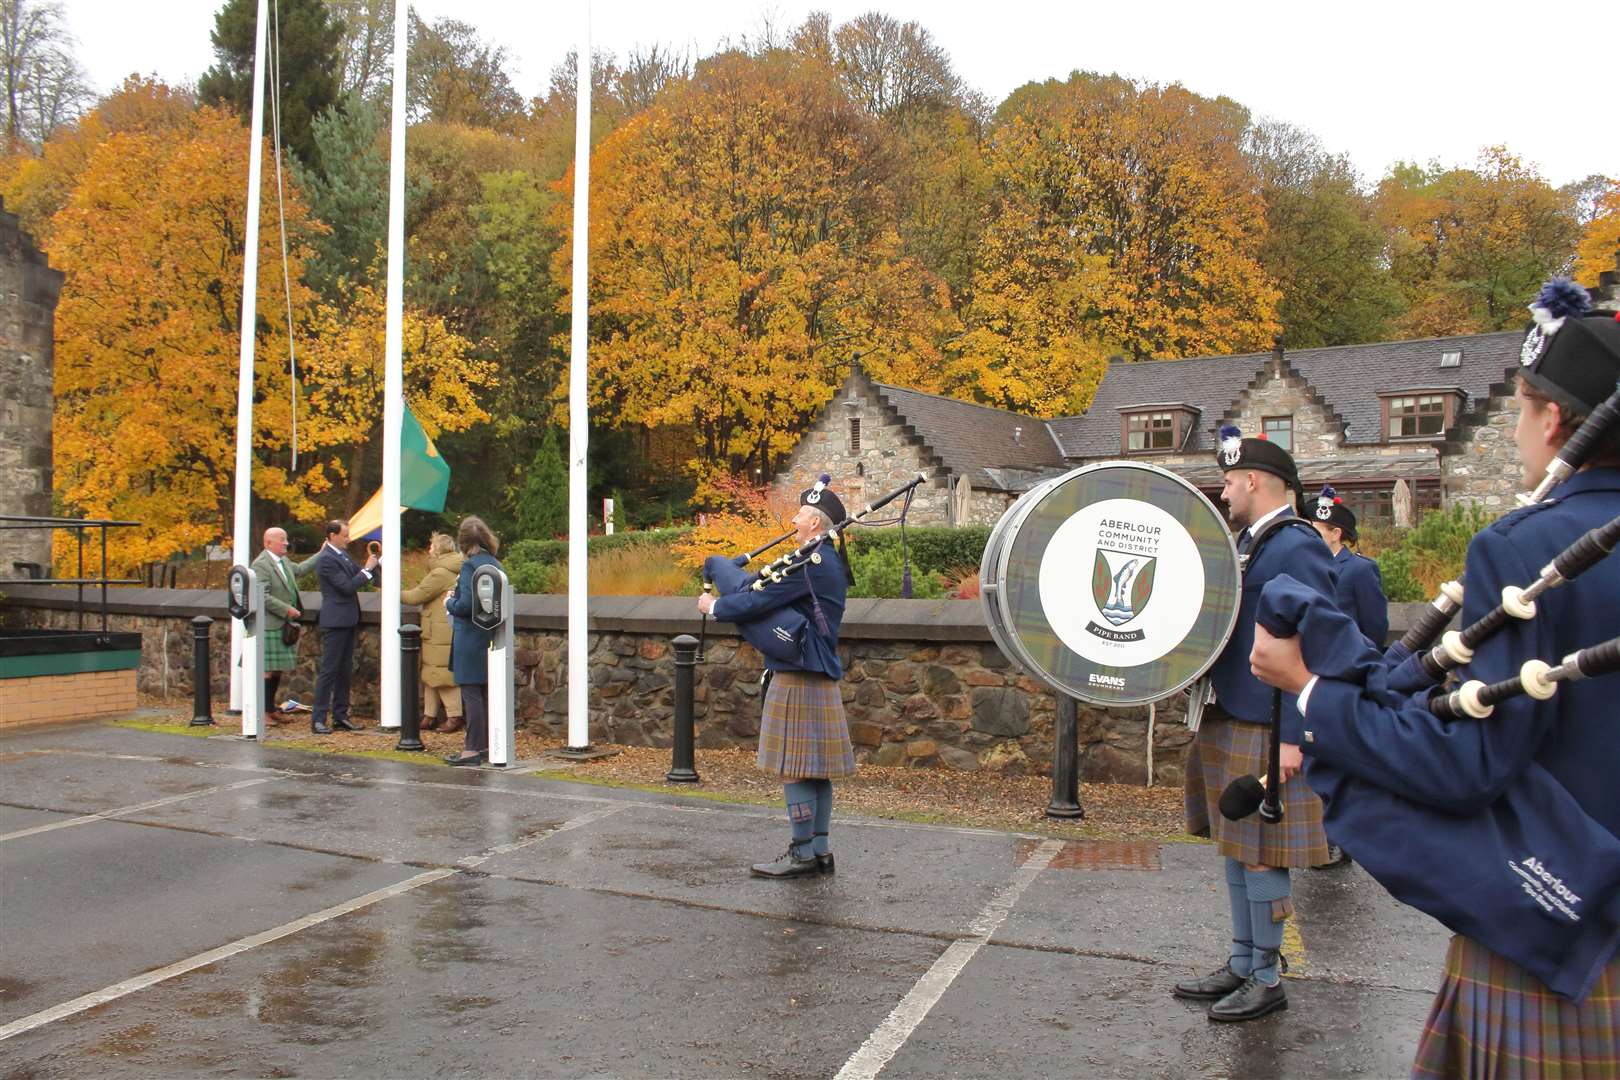 Aberlour and District Pipe Band played at the flag's unveiling.